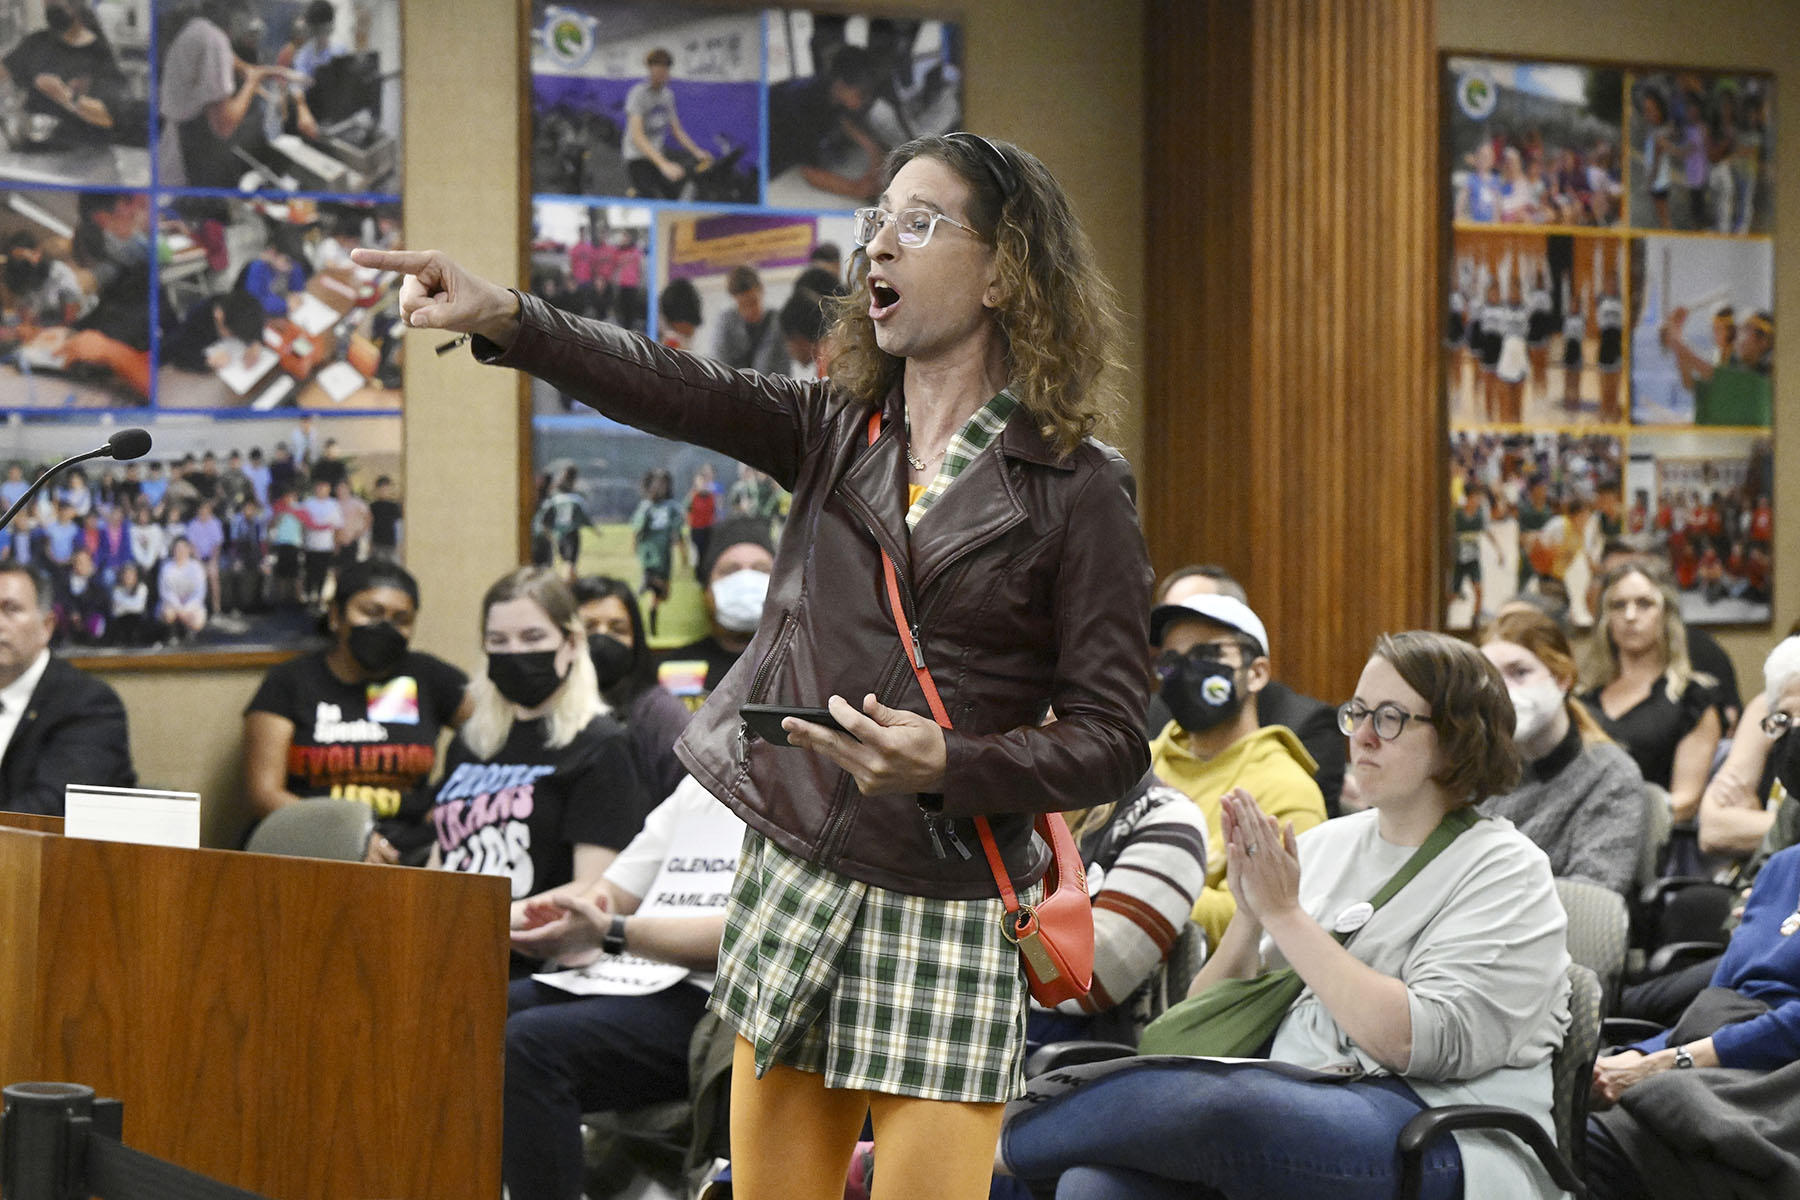 A parent expresses hope that the district continues to teach LGBTQ+ rights in schools at the Glendale Unified School District headquarters.